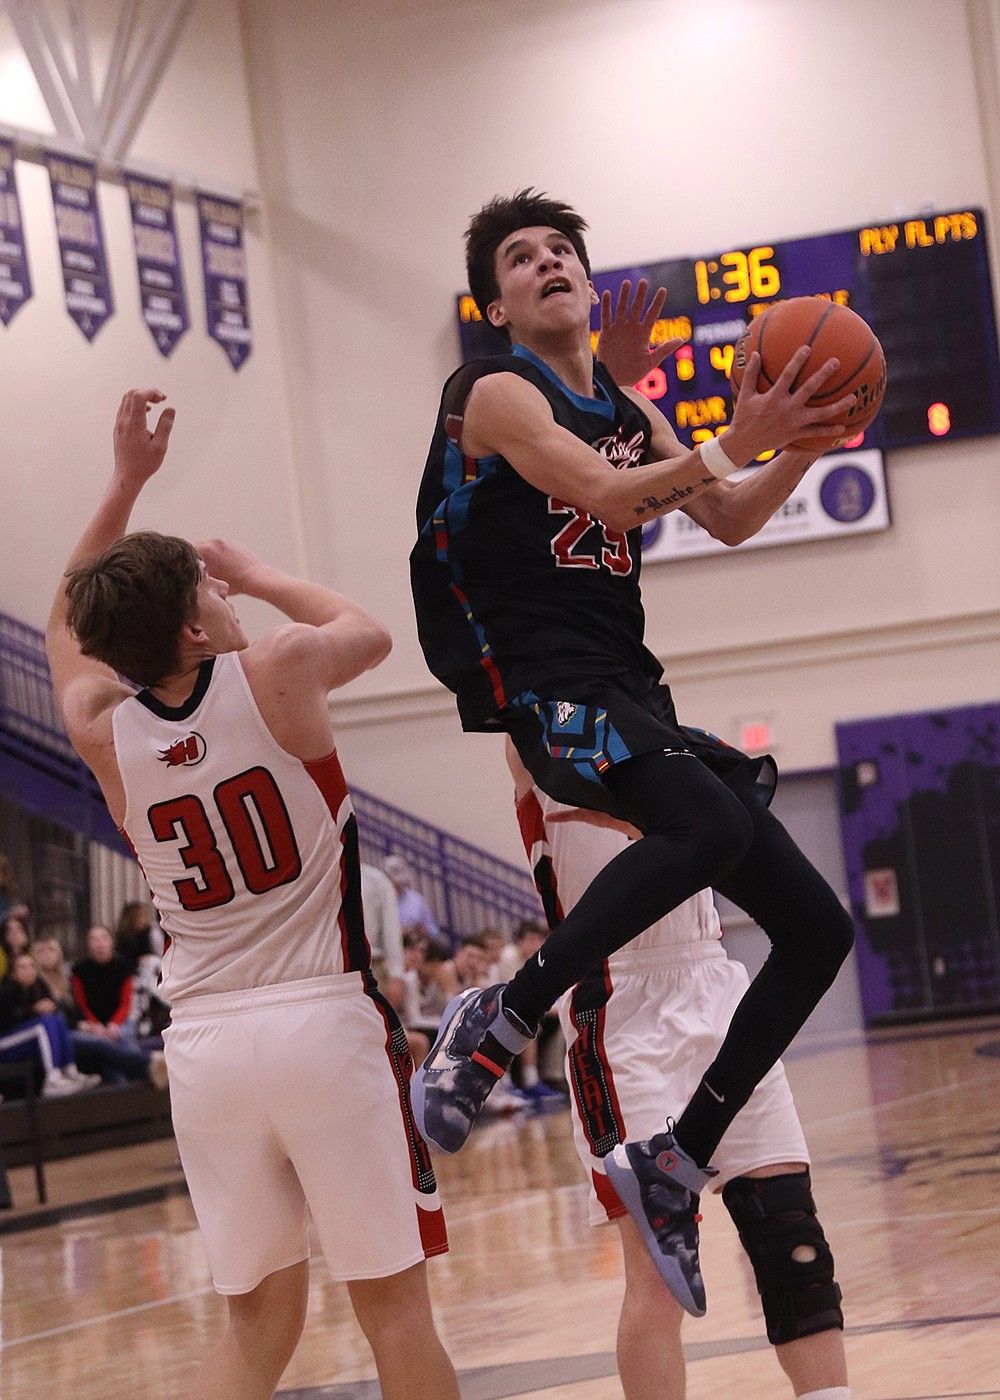 TERS Eagle Cai Burke goes up for a shot against Hot Springs Savage Heat during last weekend's Western 14C District Tournament in Polson. (Bob Gunderson photo)